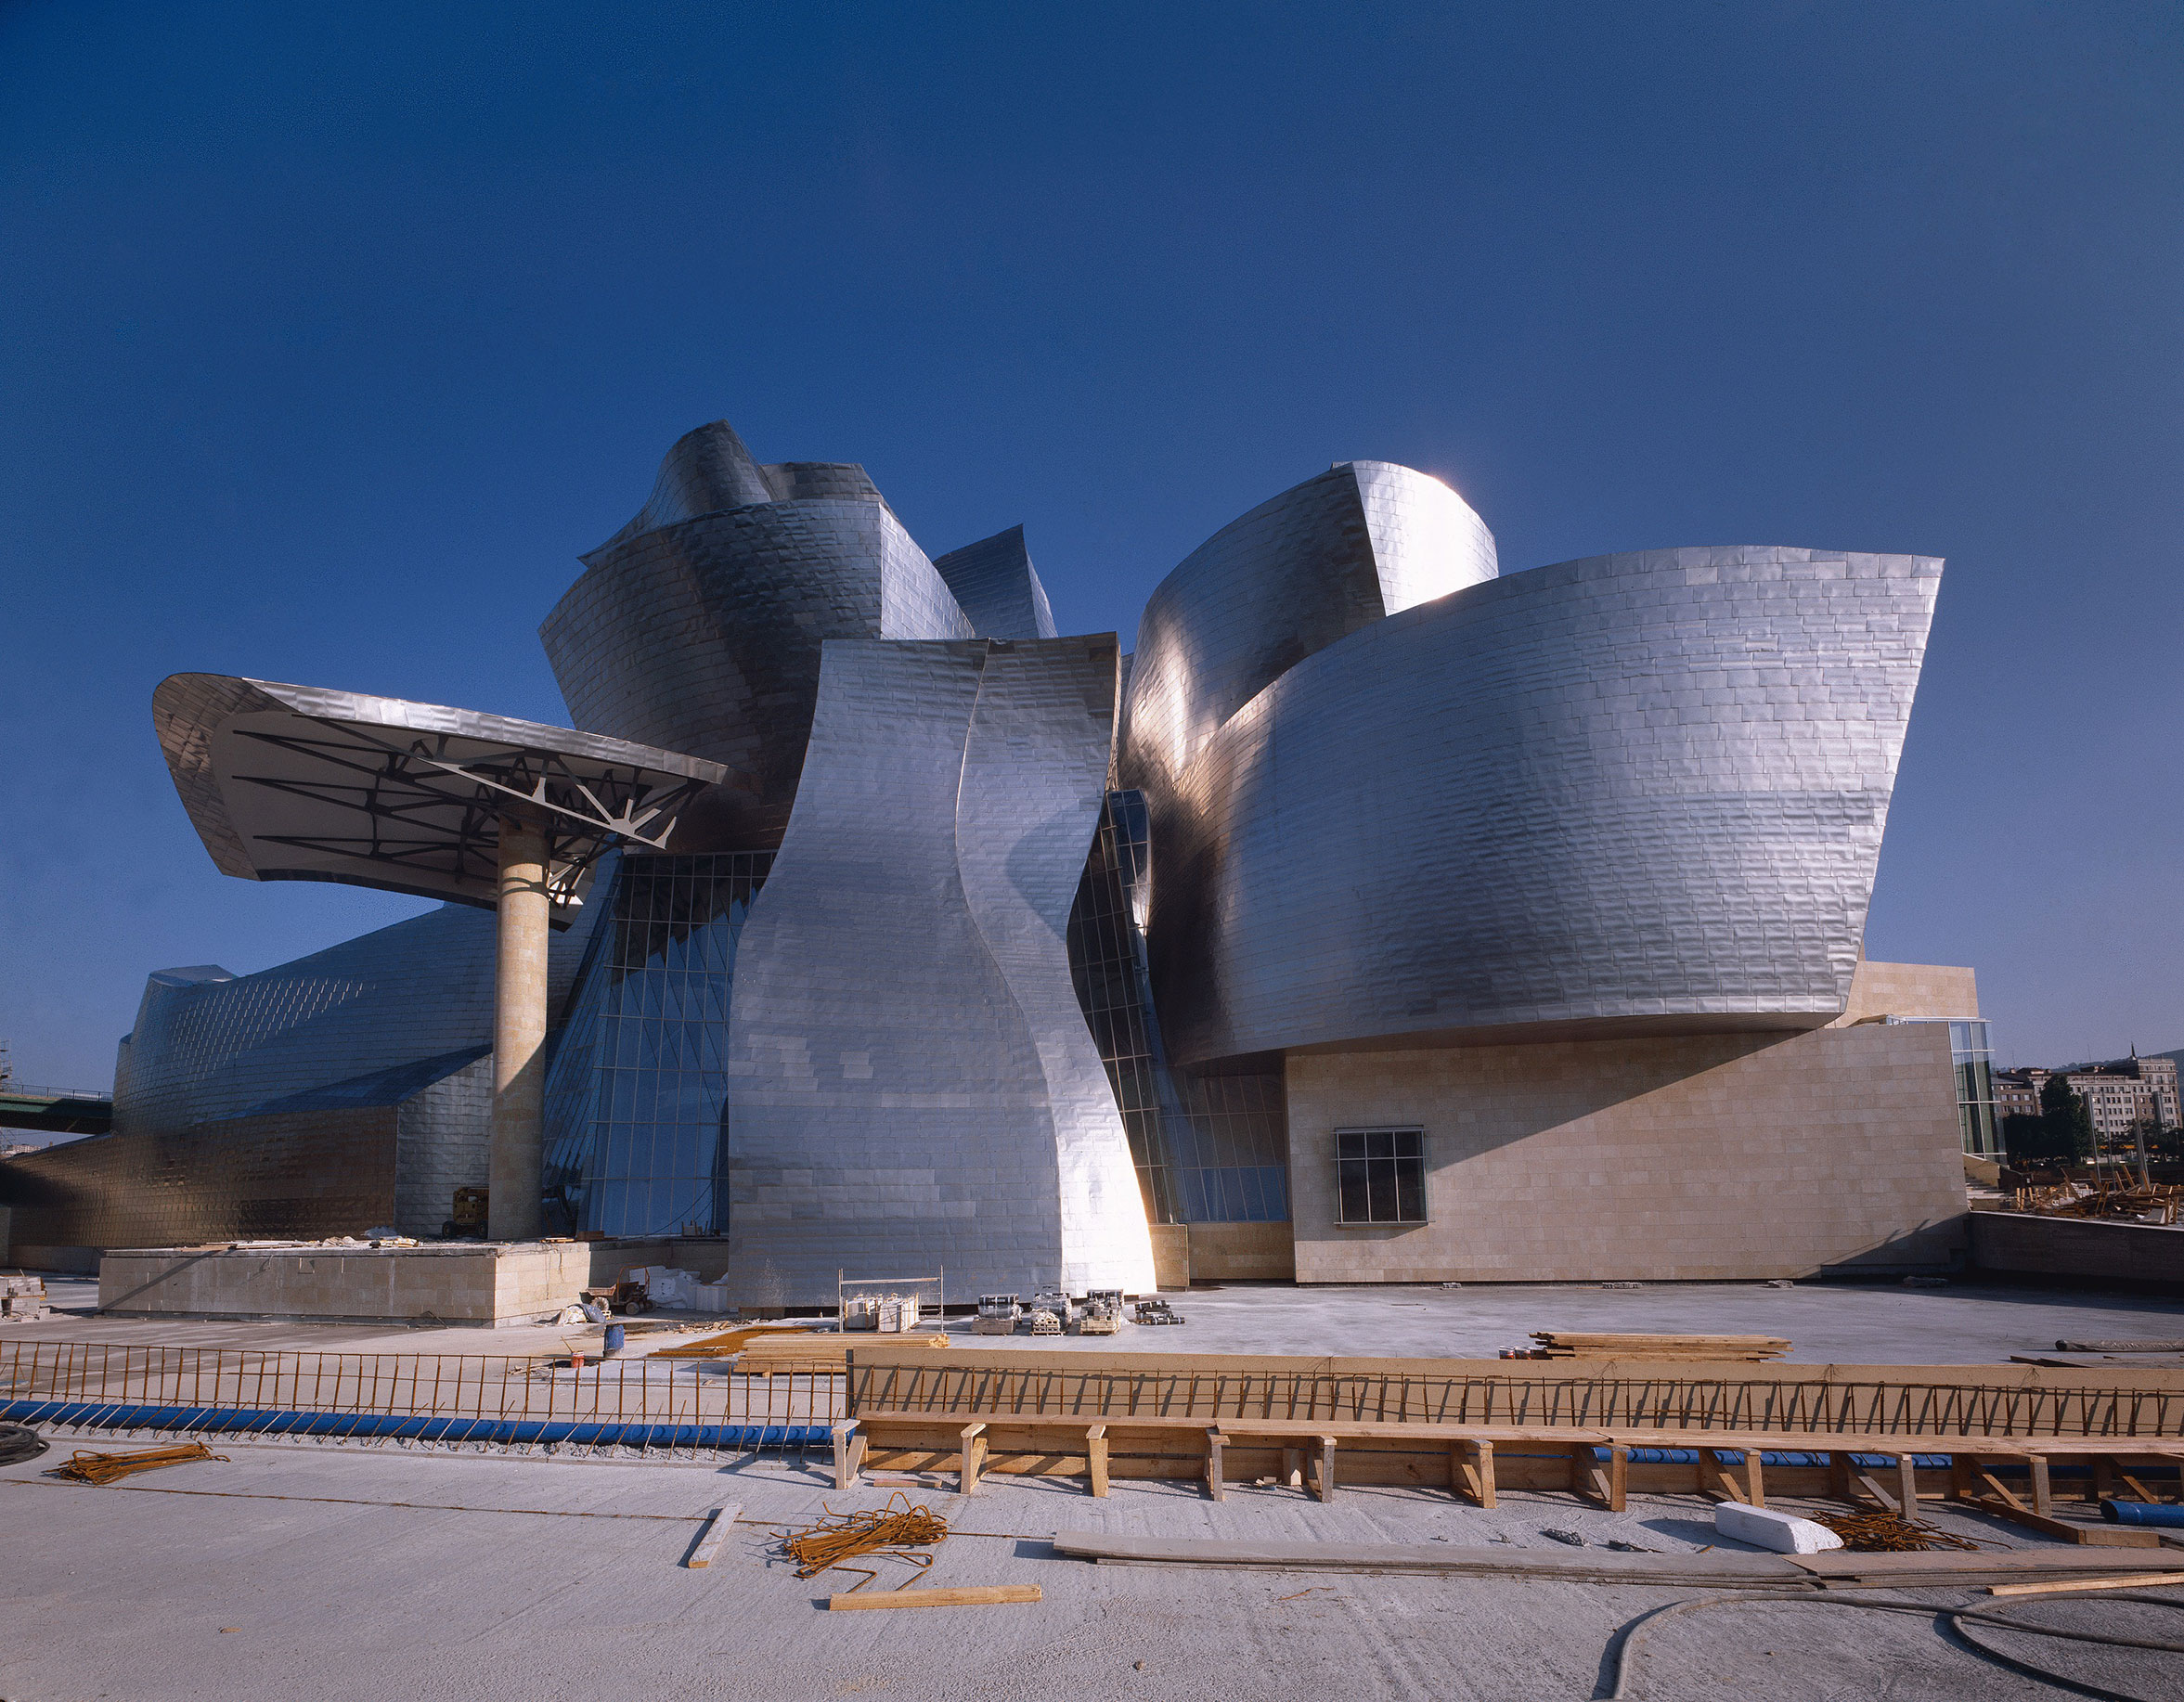 Frank Gehry: Architect  The Guggenheim Museums and Foundation